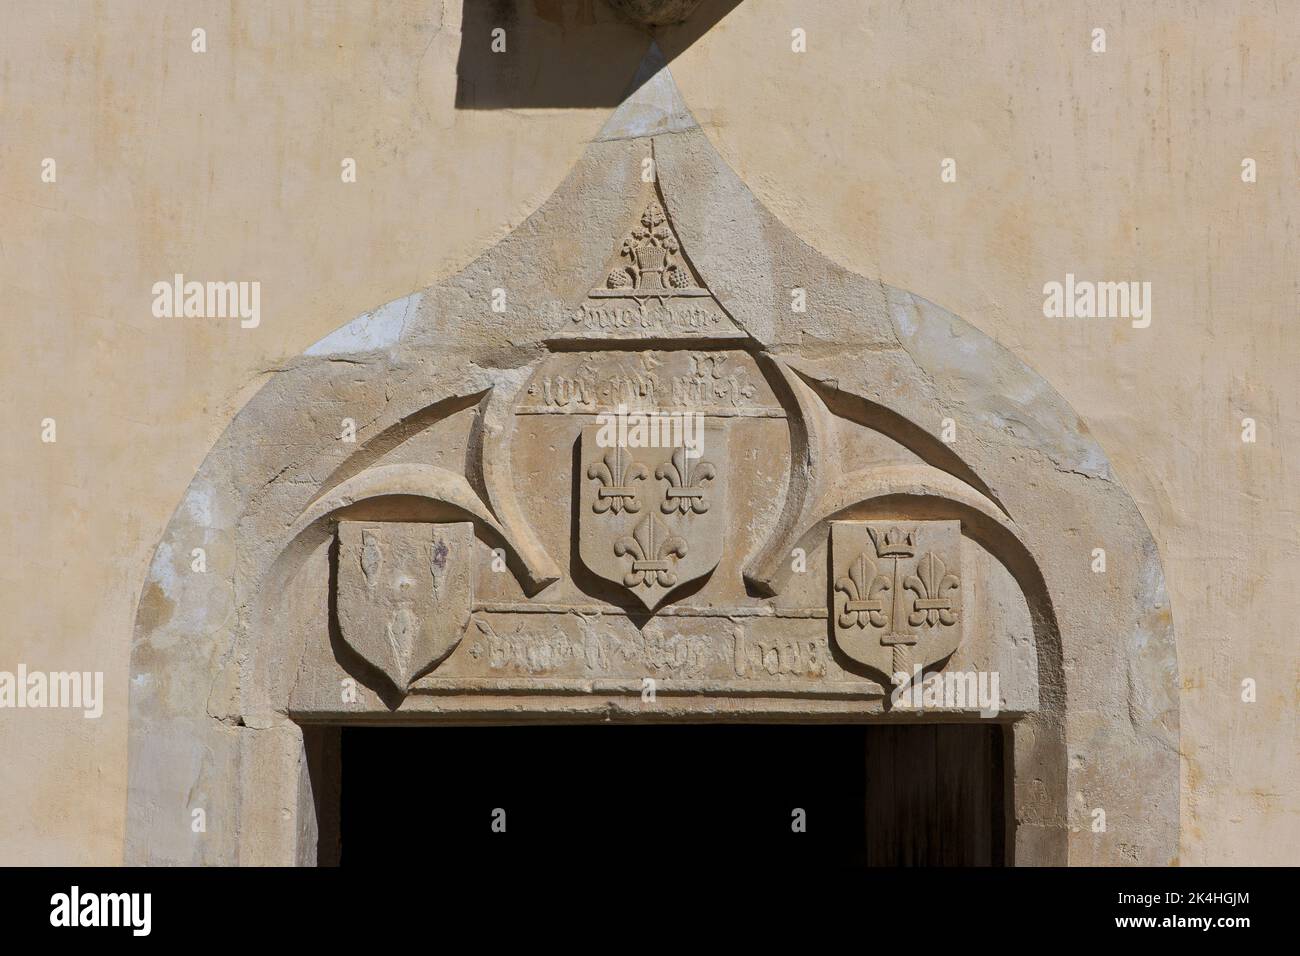 The family crest (coat of arms) above the entrance door of the birthplace of Joan of Arc (1412-1431) in Domrémy-la-Pucelle (Vosges), France Stock Photo